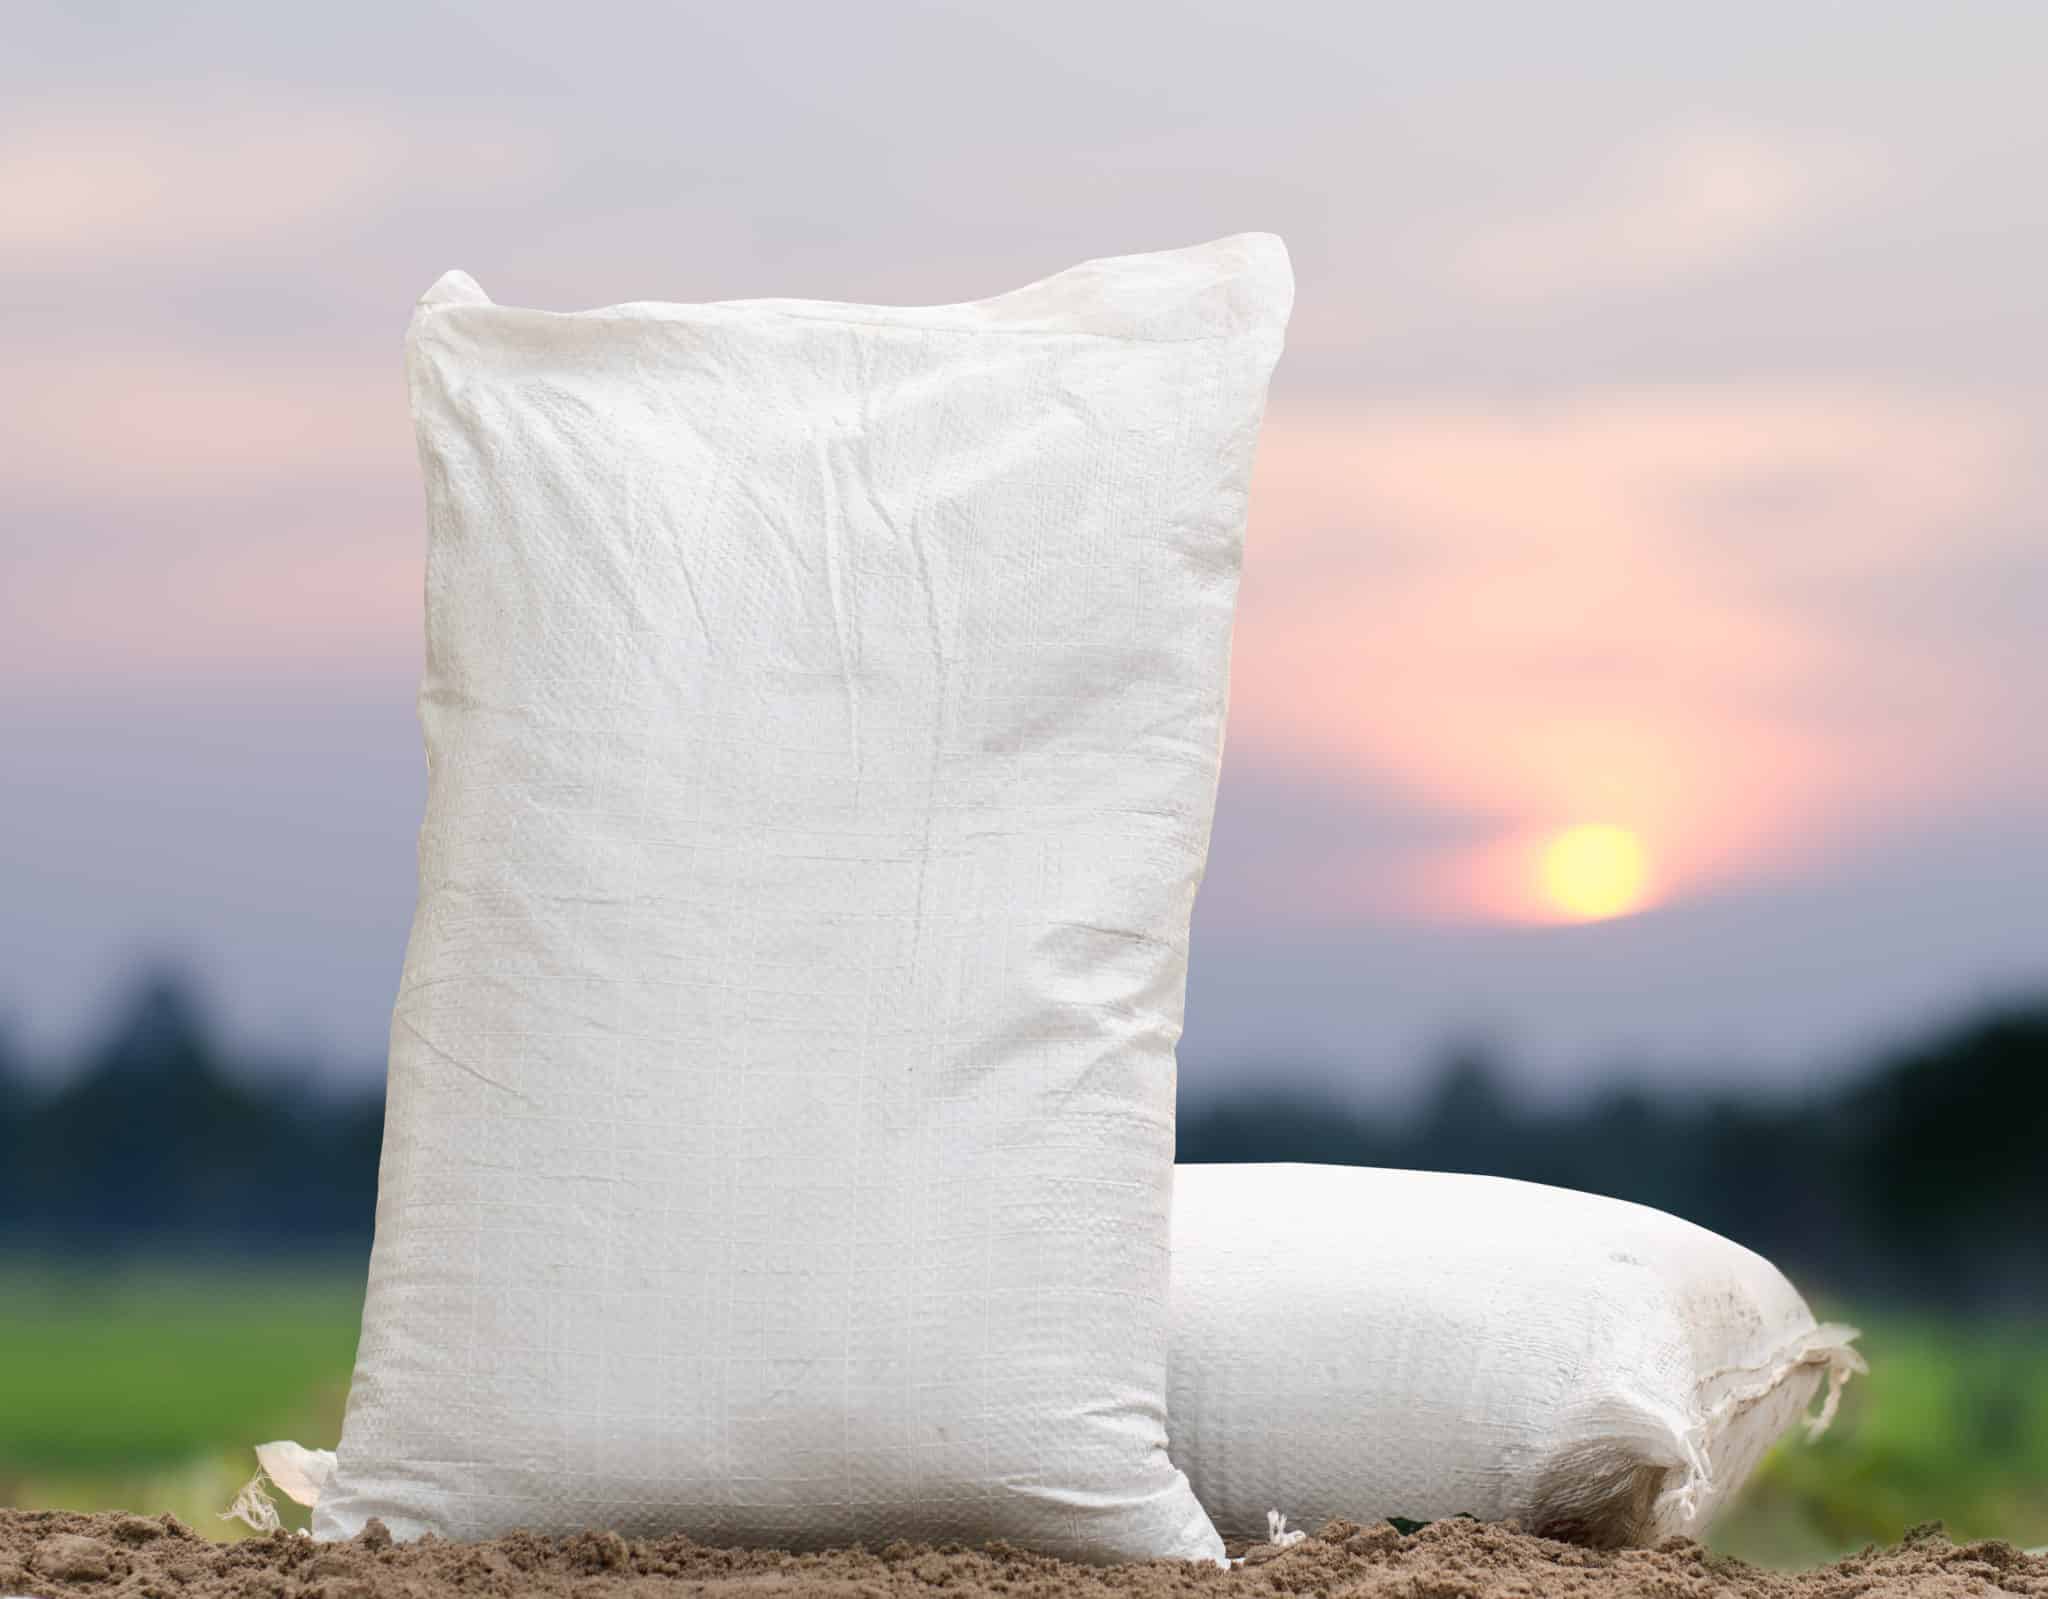 Two sand bags sitting on ground with pretty sky background